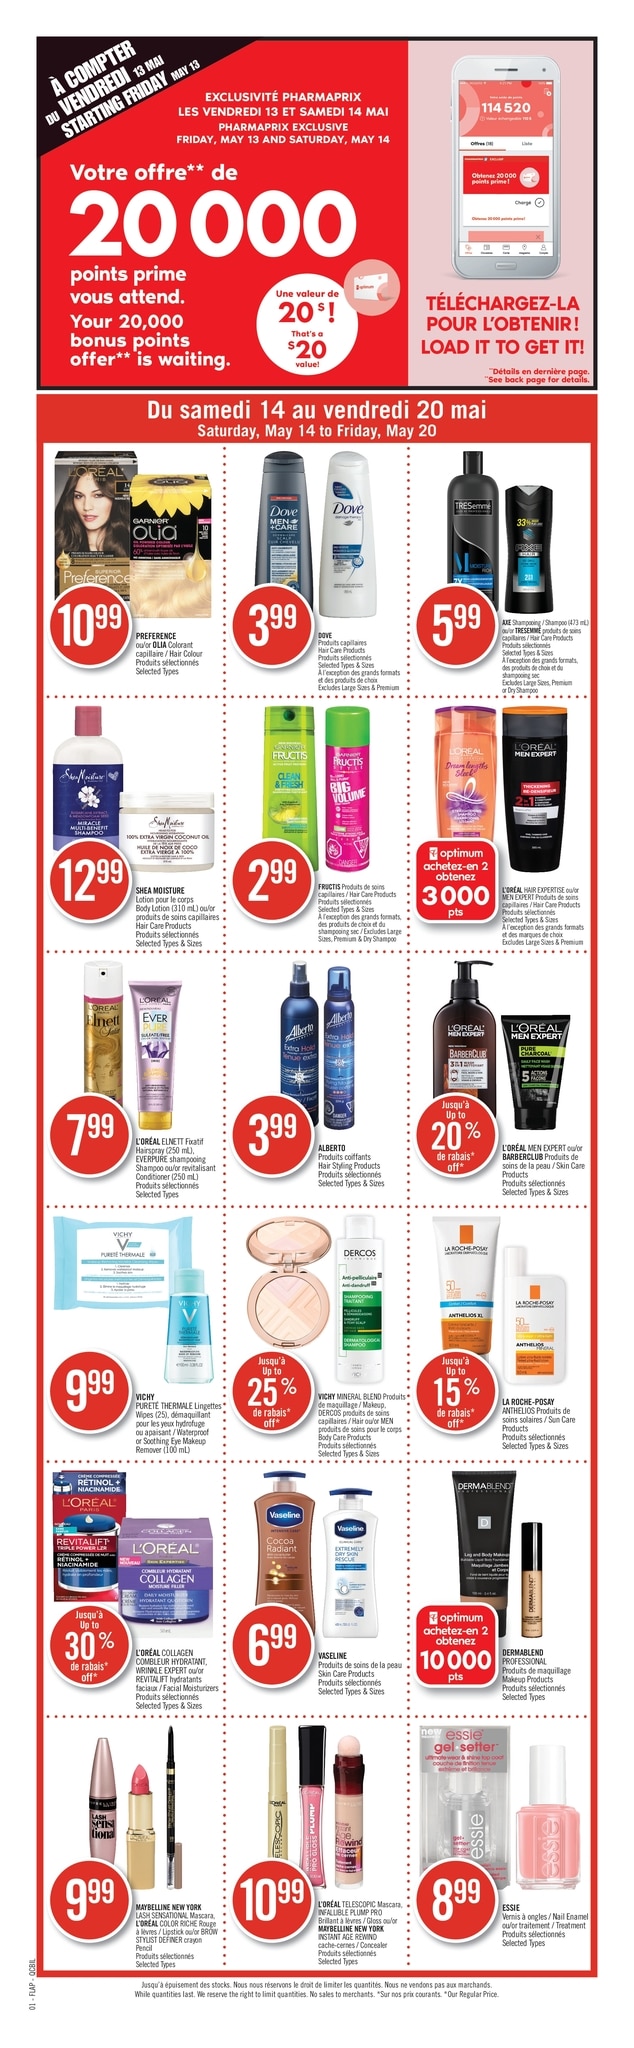 Pharmaprix - Weekly Flyer Specials - Page 1